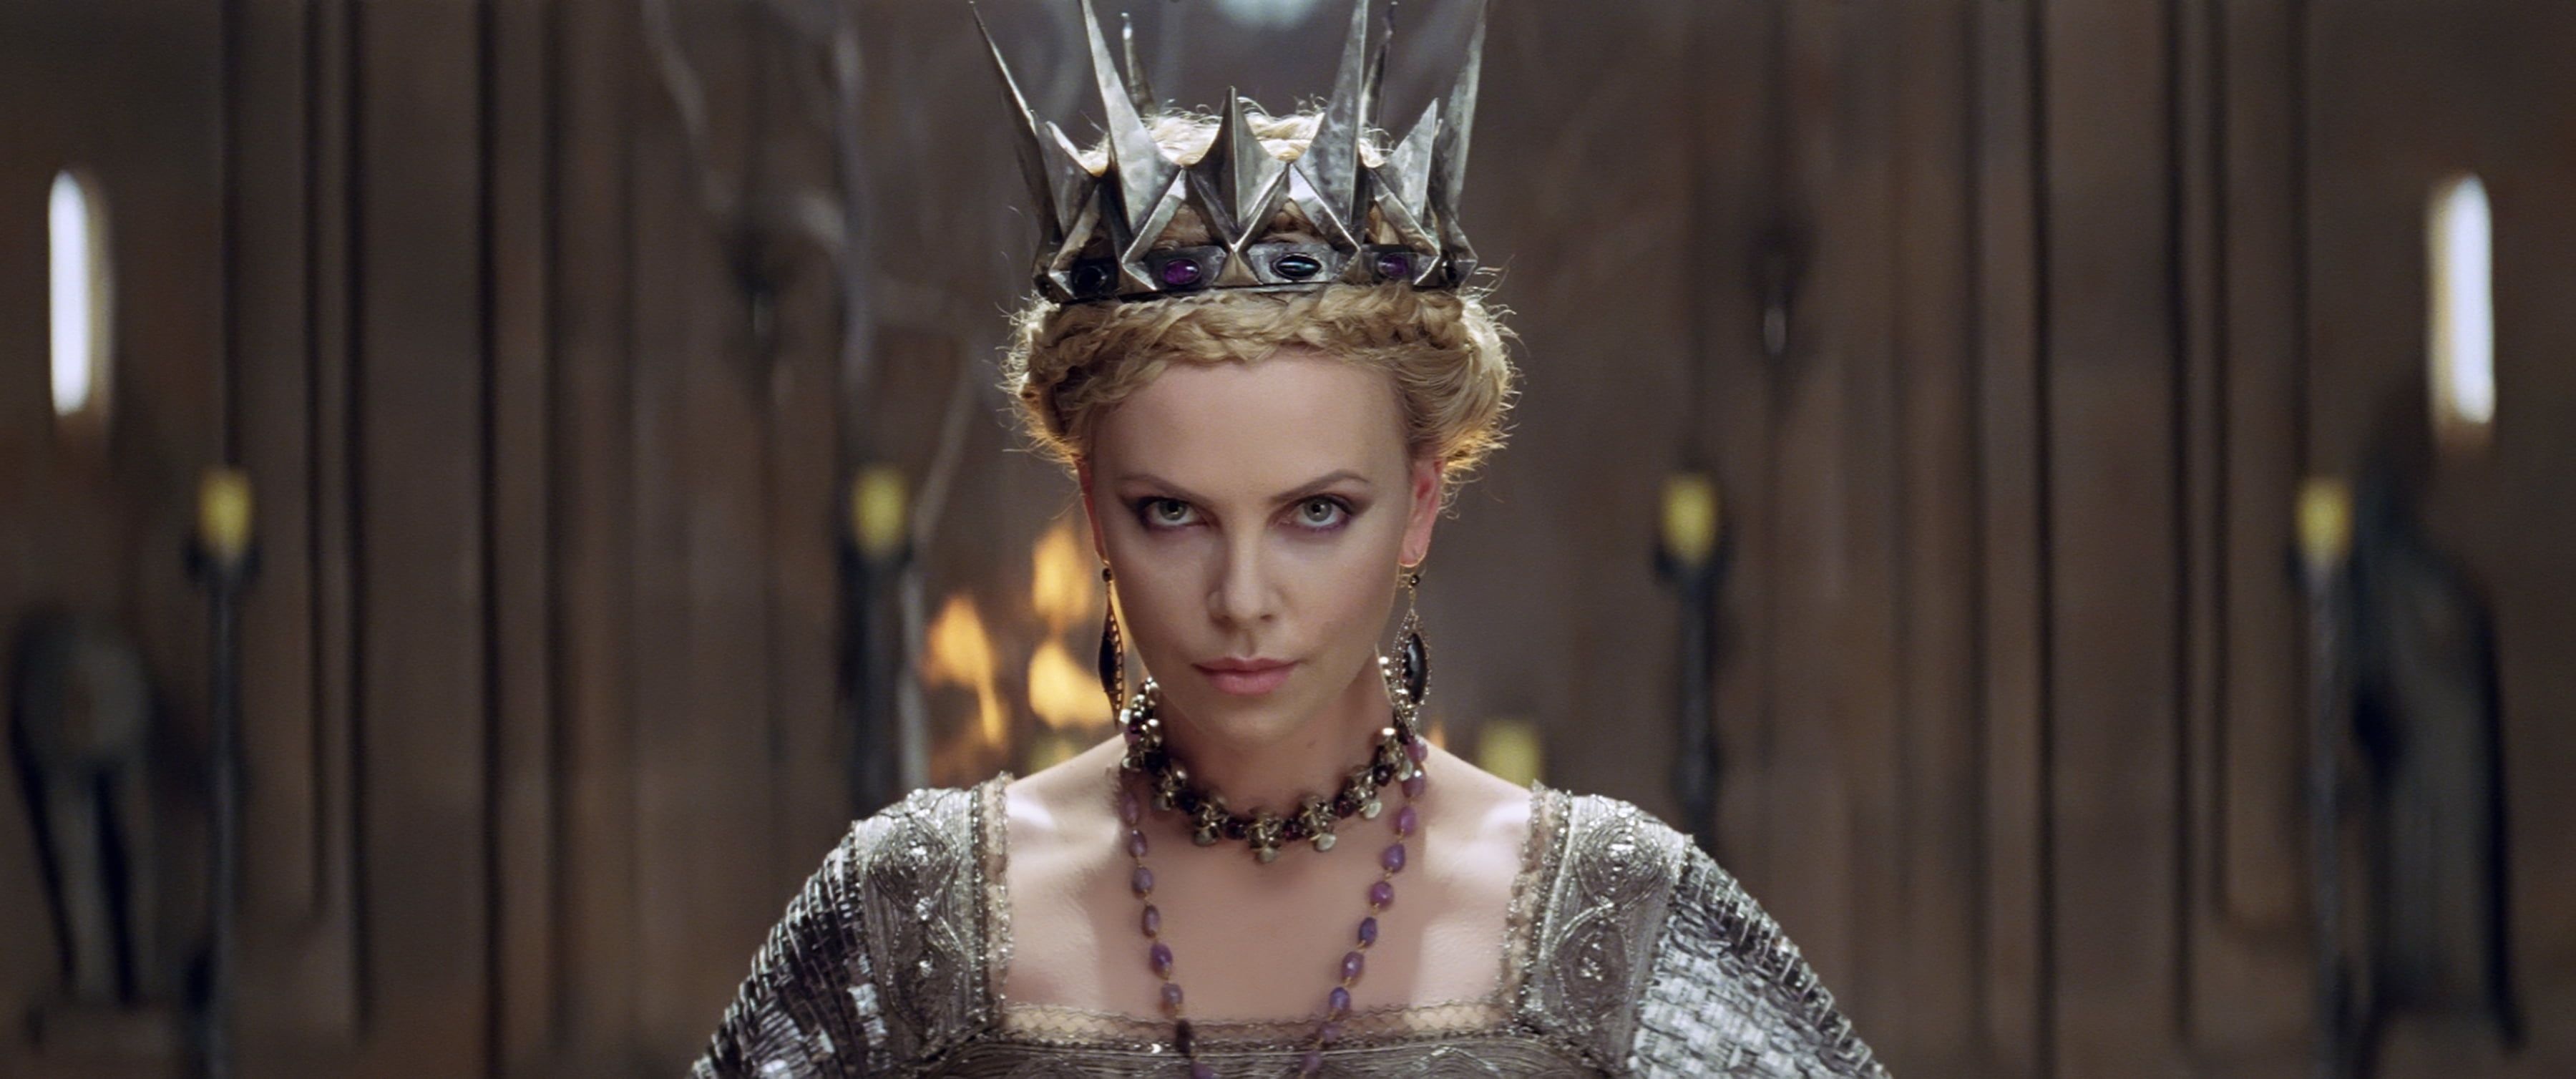 Queen Ravenna, Charlize Theron, Snow White and the Huntsman, Blonde actresses, 3600x1510 Dual Screen Desktop